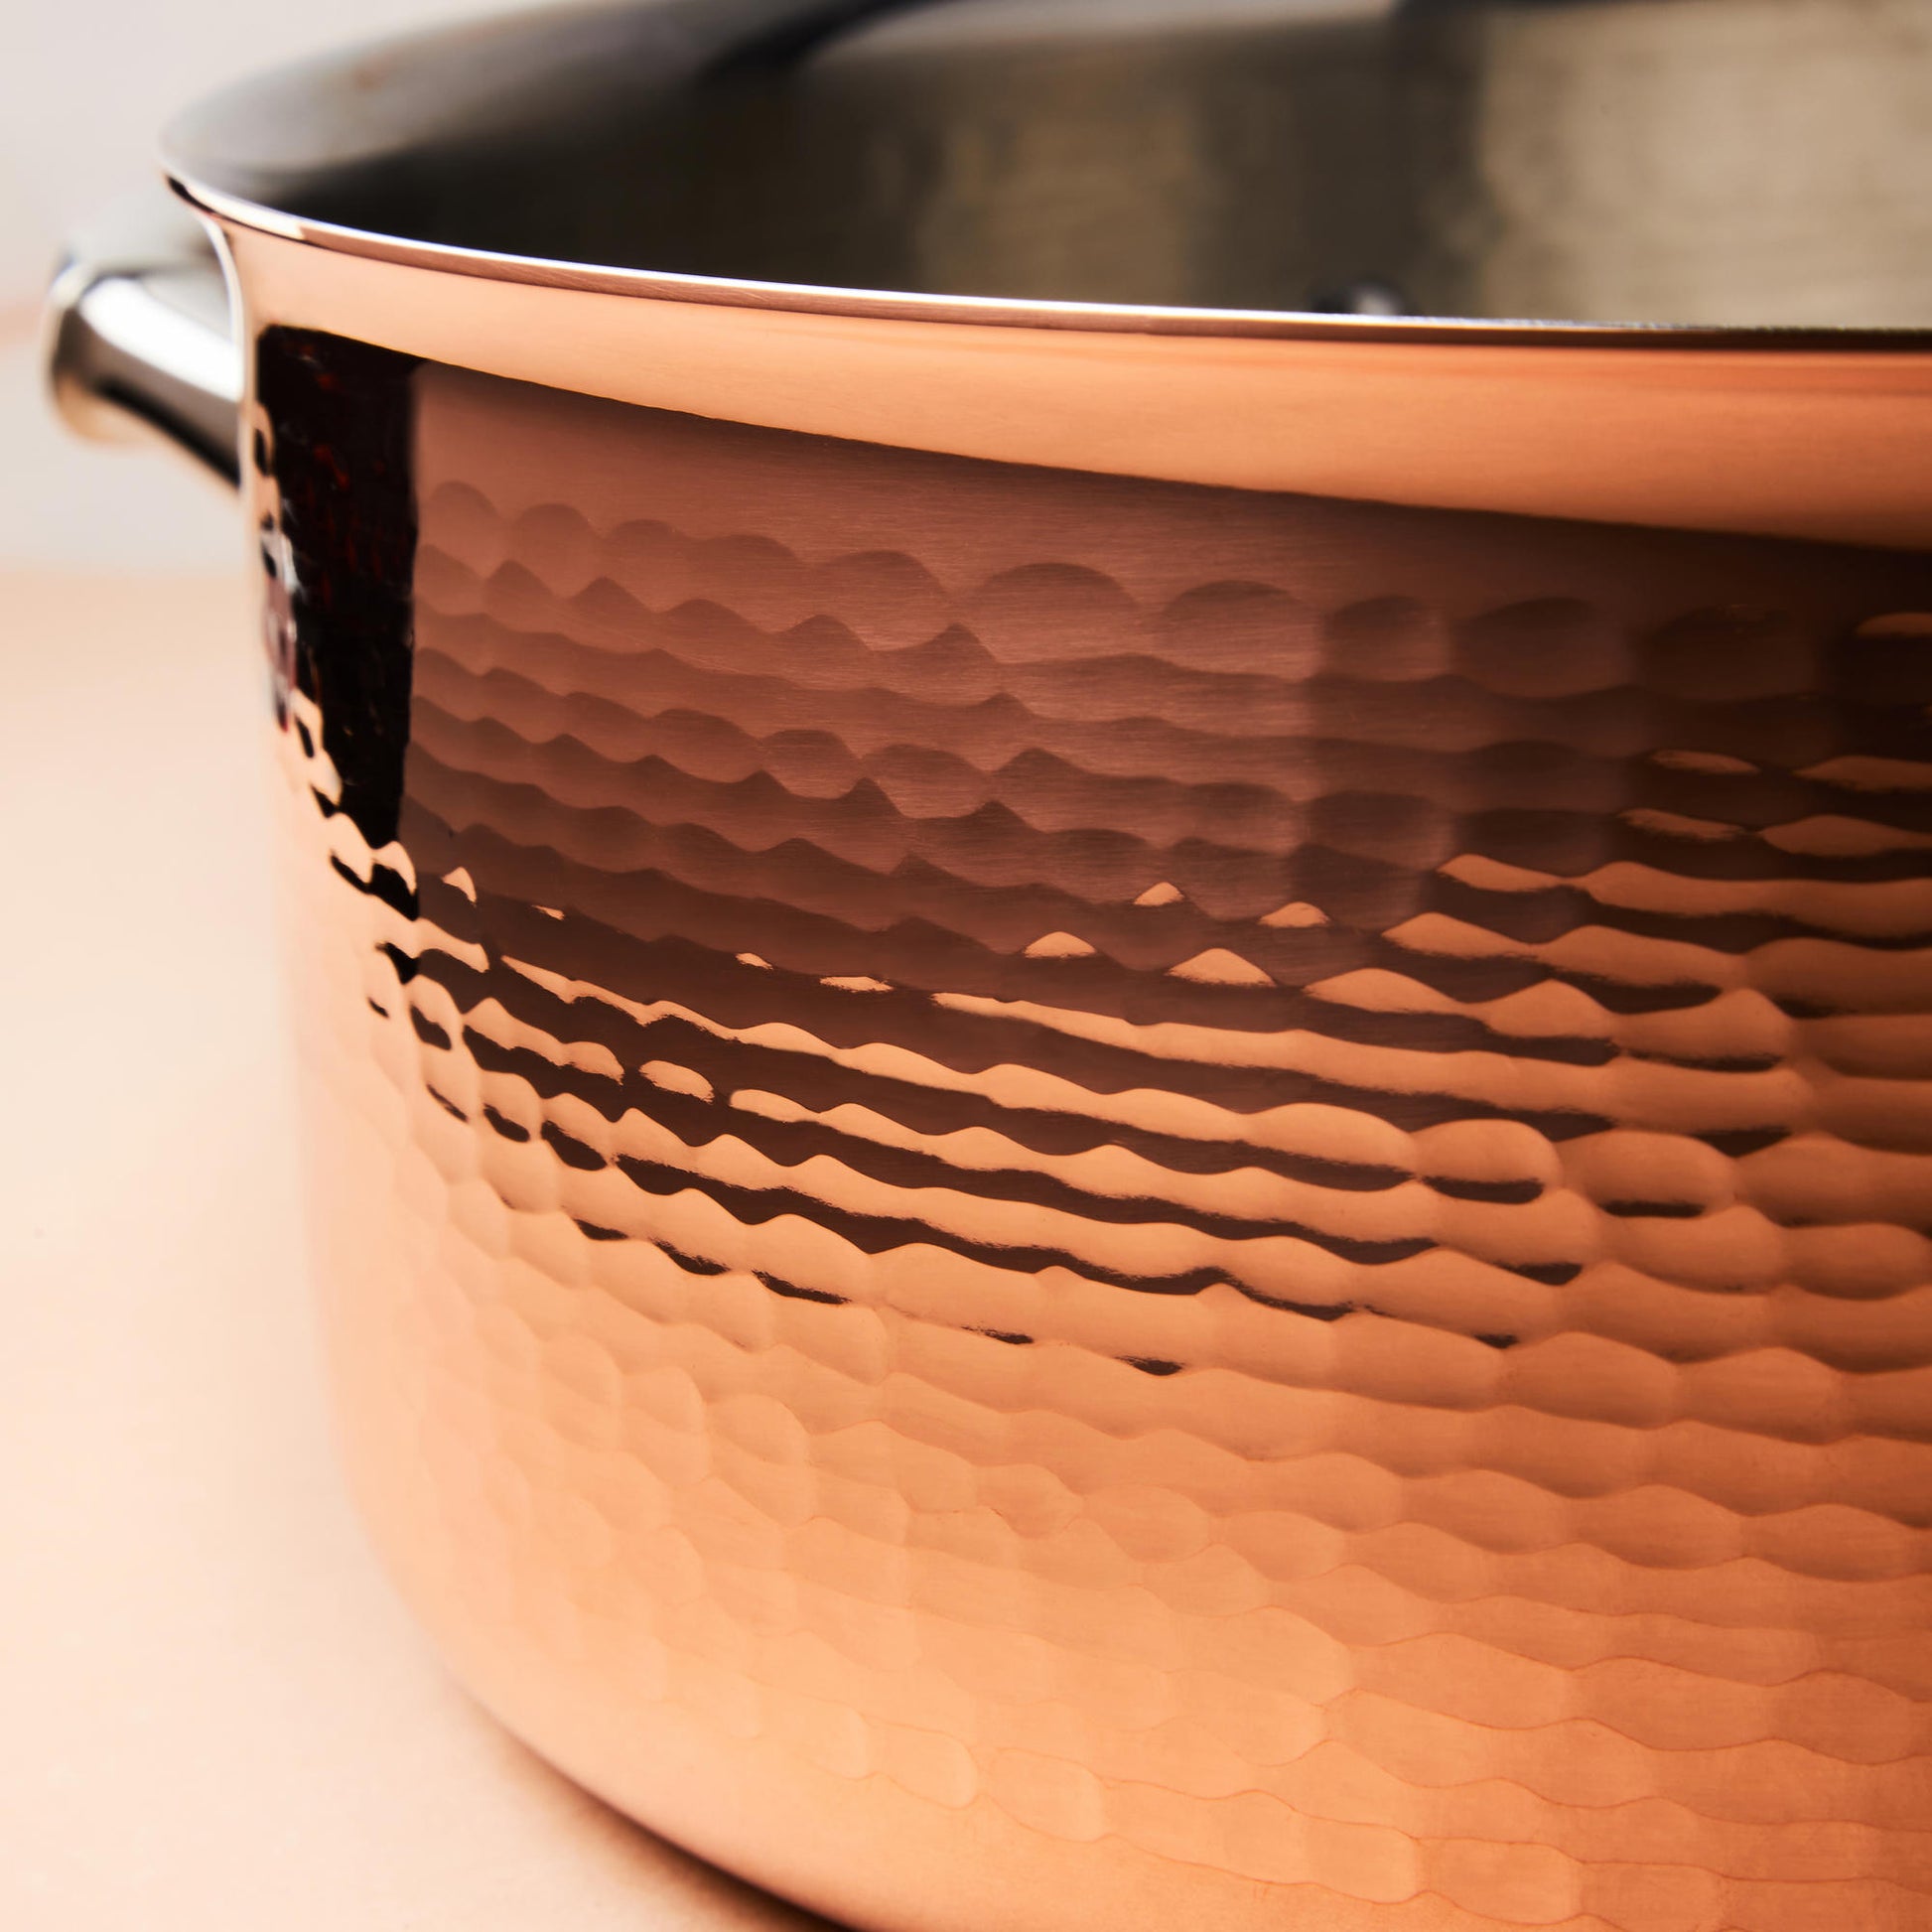 Hammering increases strength and beauty of copper clad with stainless steel cookware from Ruffoni